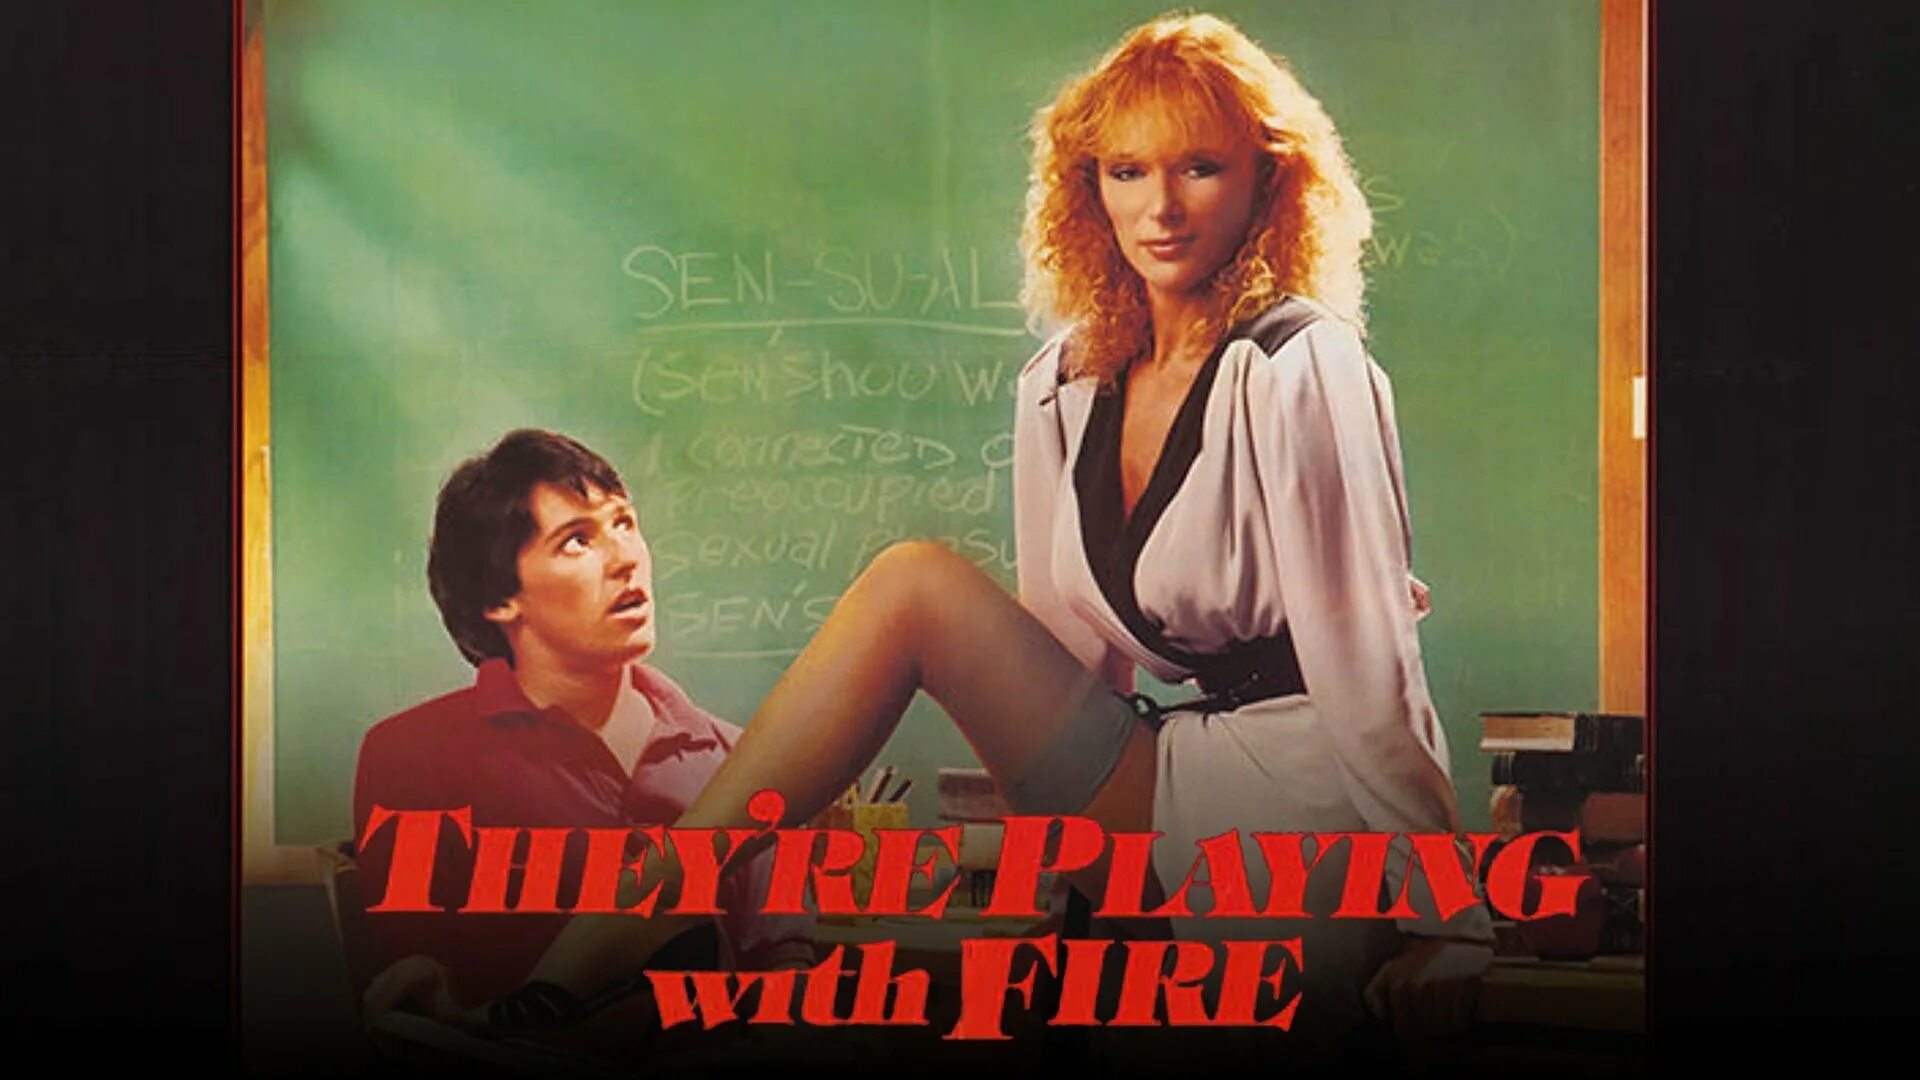 Частные уроки 1994. Сибил Даннинг they're playing with Fire. They're playing with Fire 1984.